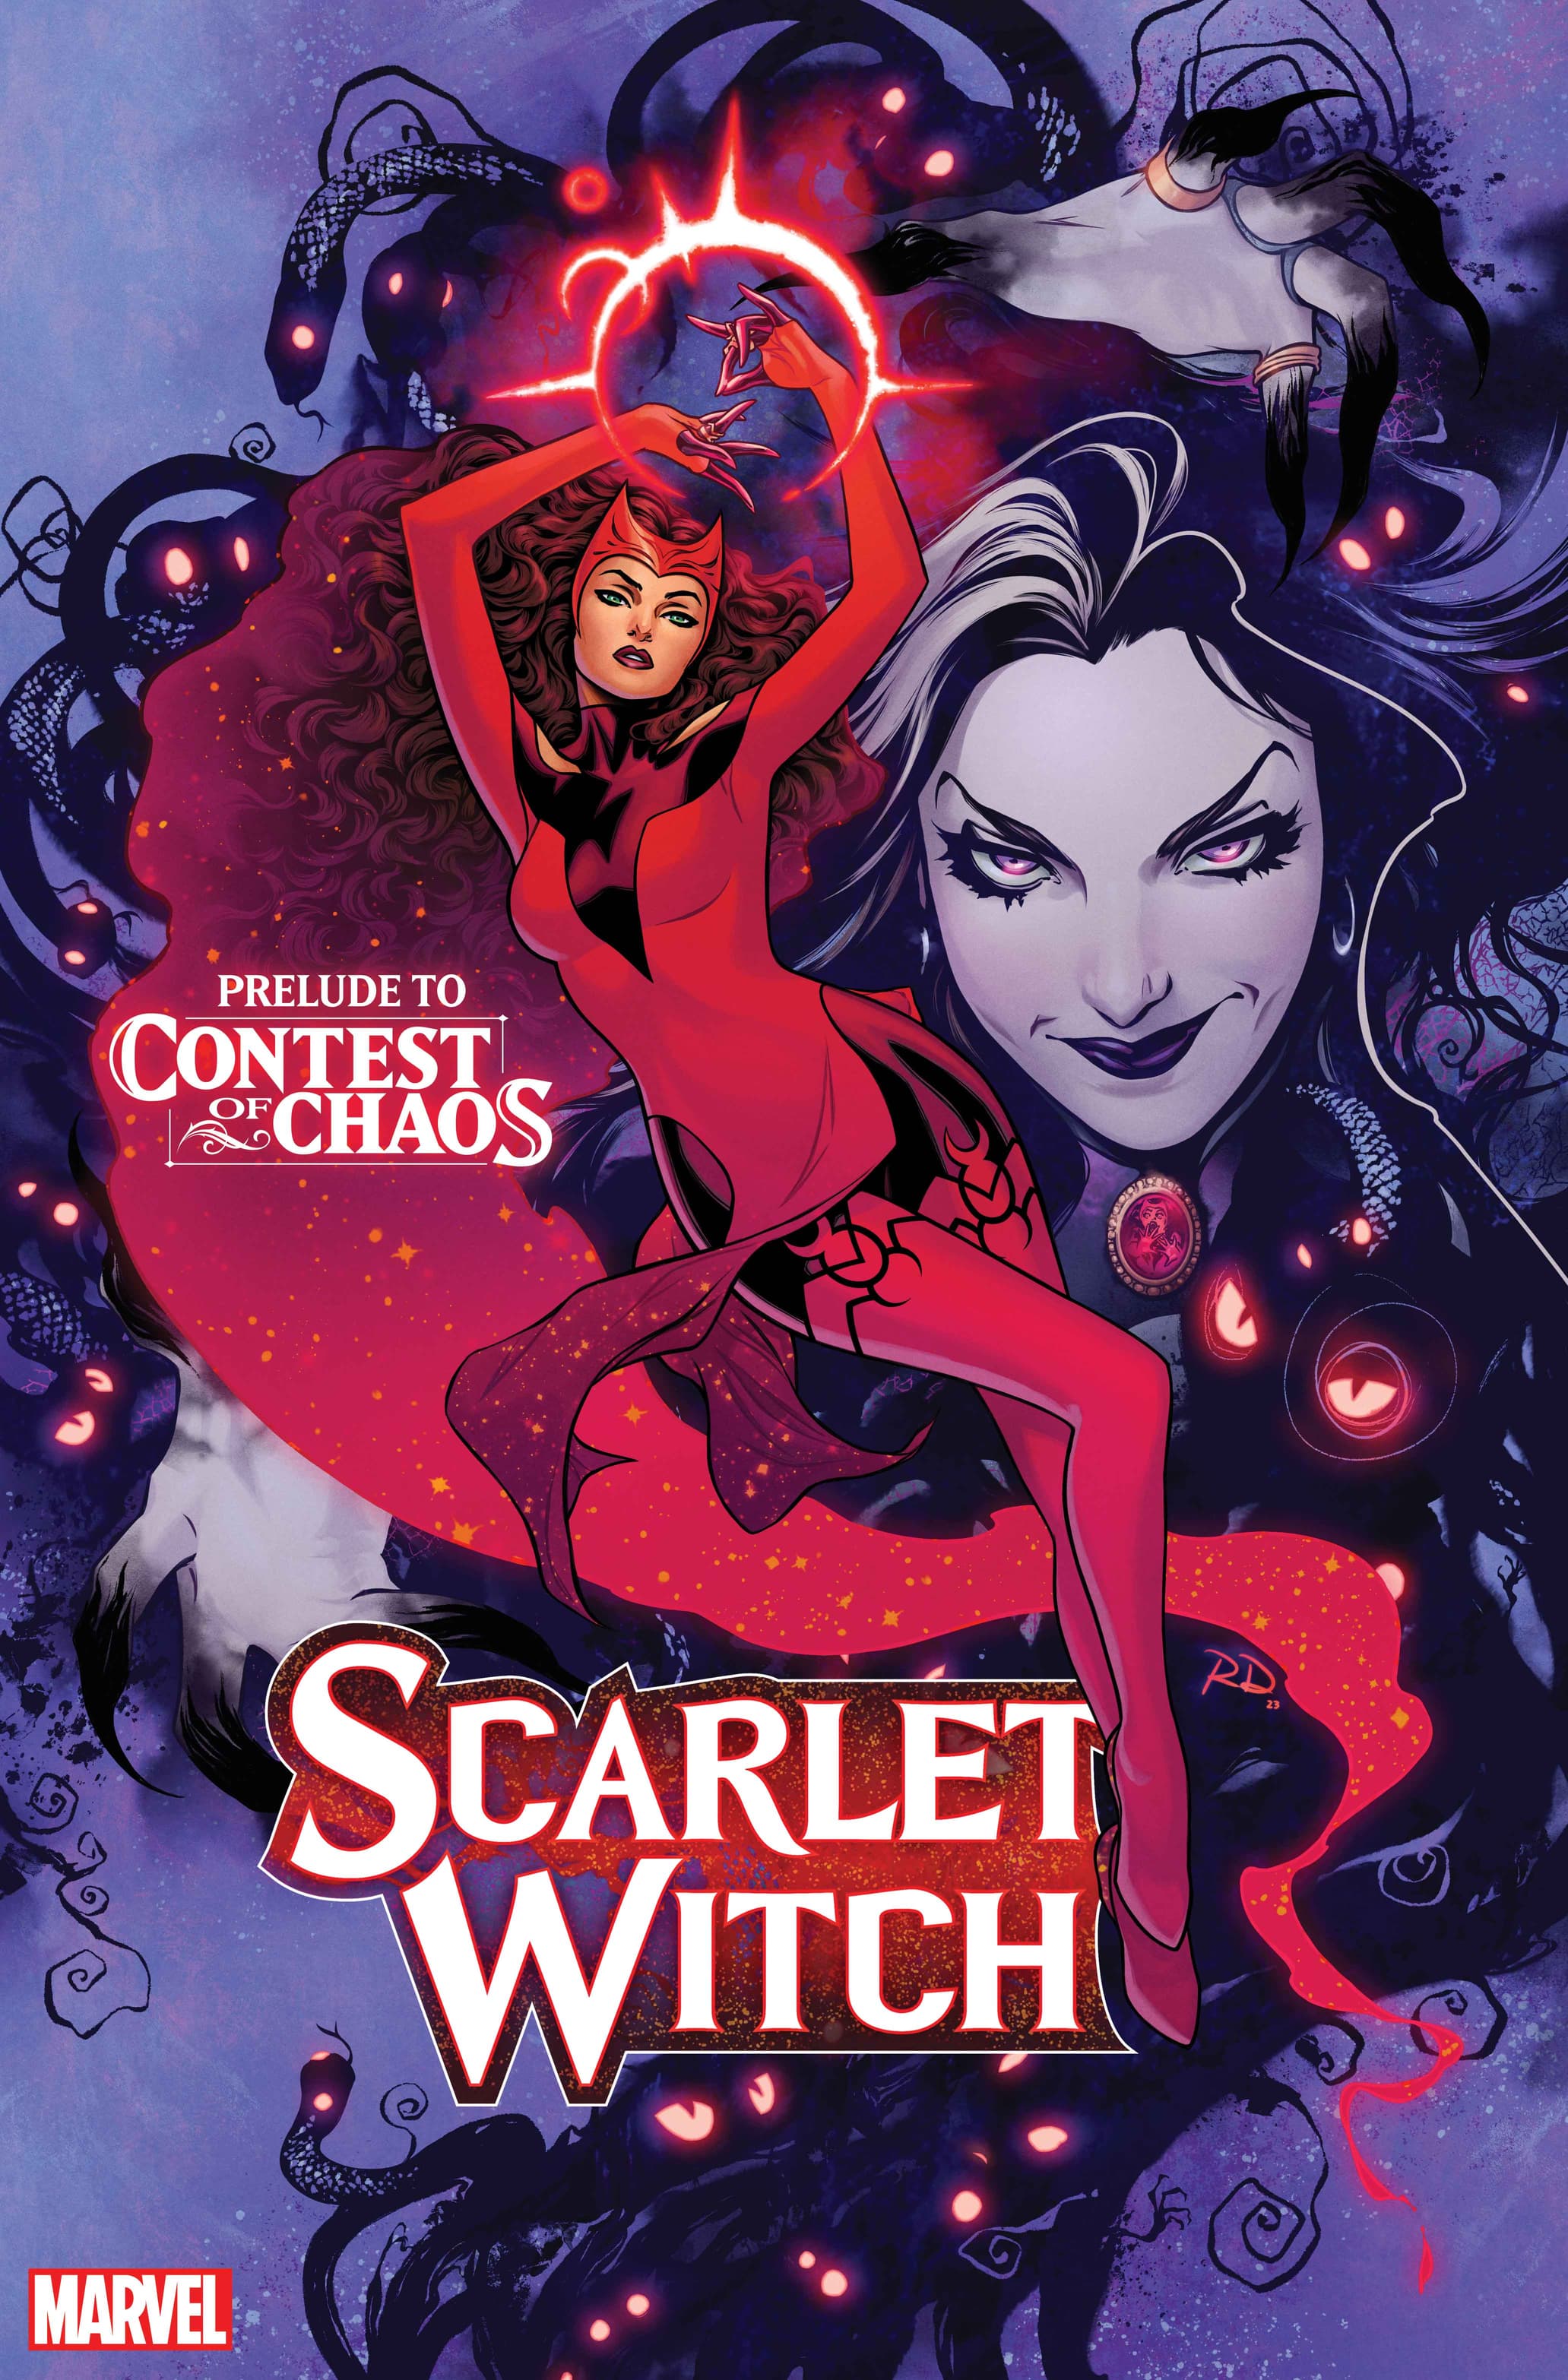 Respect The Scarlet Witch (Complete Respect Thread)